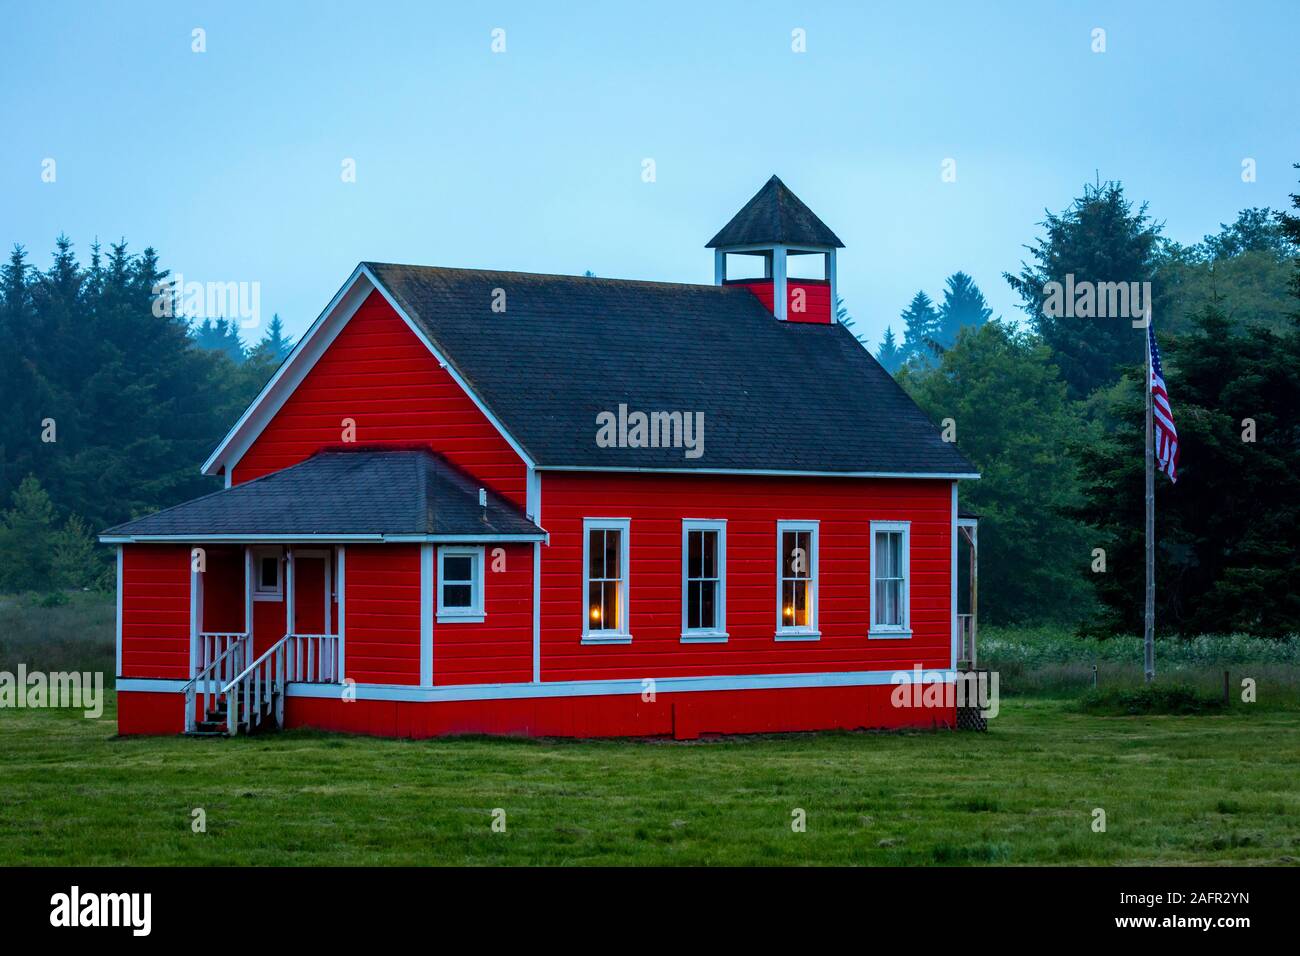 MAY 31, 2019, N CALIFORNIA, USA - Stone Lagoon one-room school house Northern California off Route 101 Stock Photo